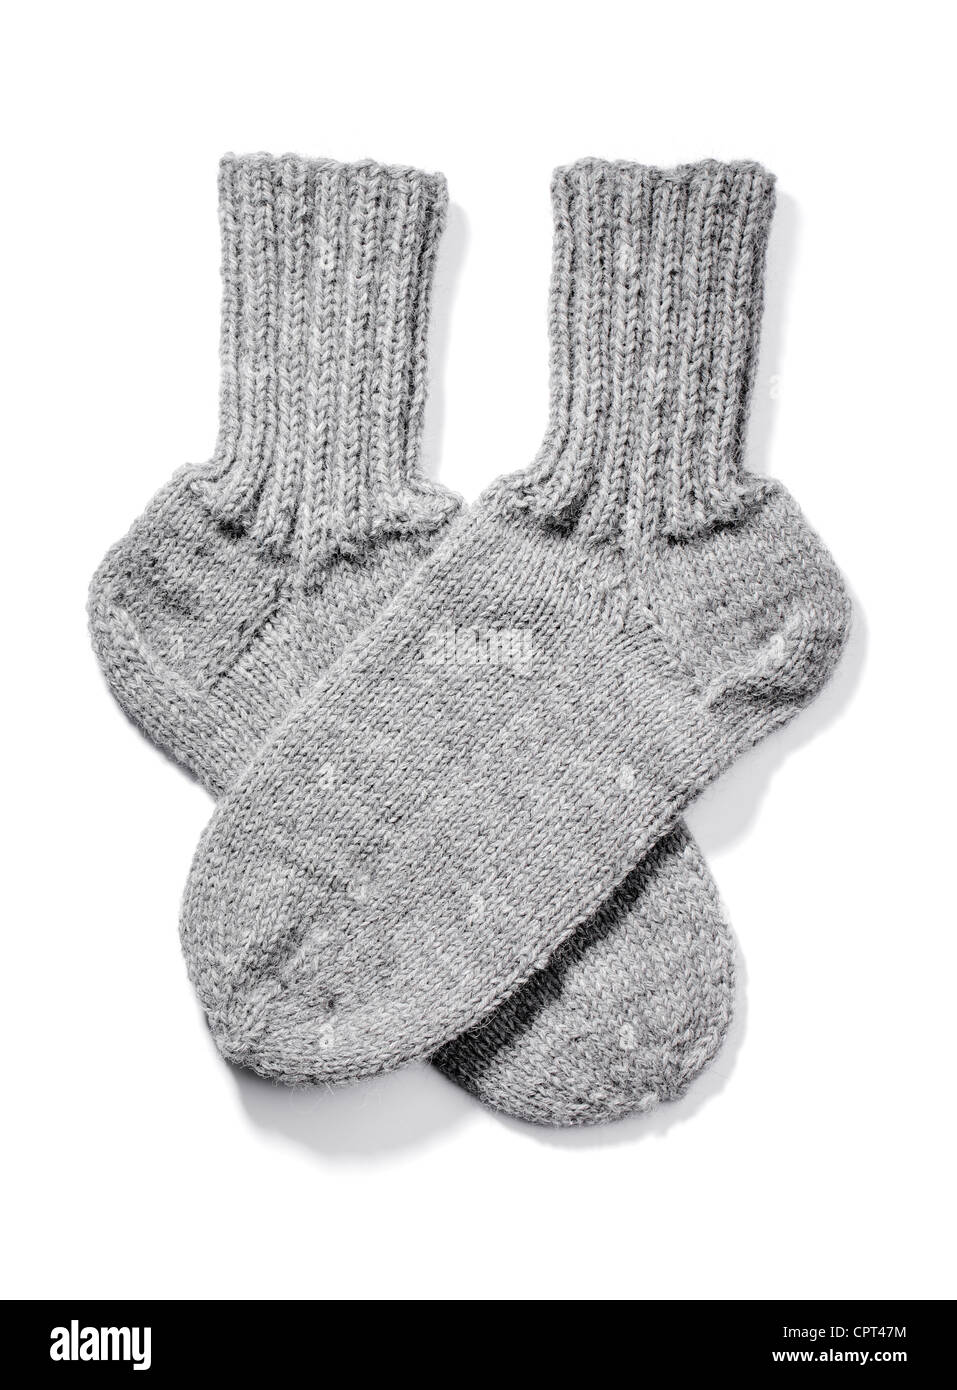 Hand-knitted warm wool socks isolated on white with natural shadows. Stock Photo